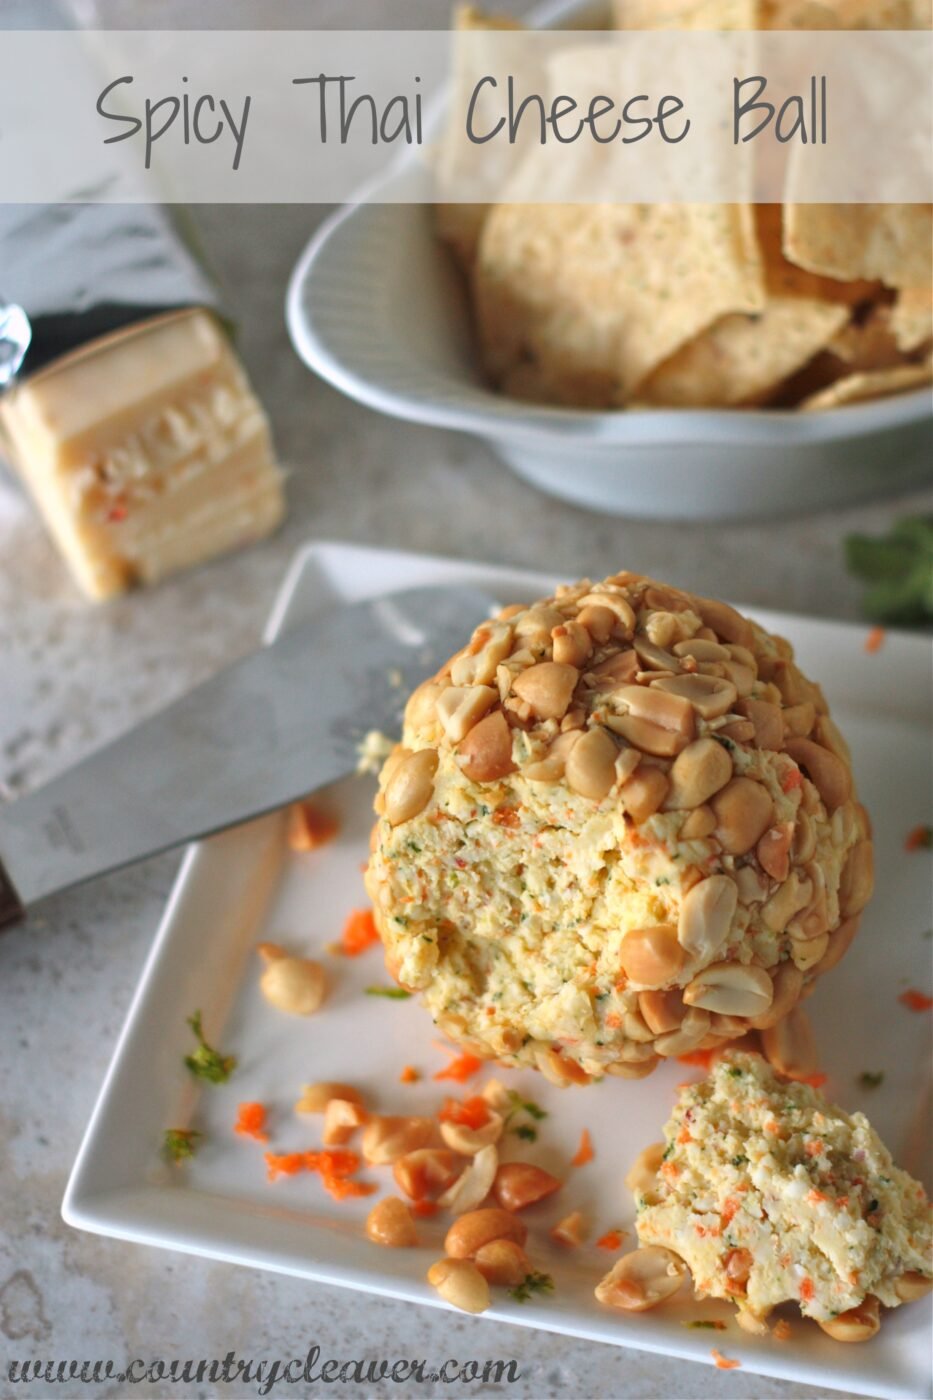 Spicy Thai Cheese Ball | 25+ Cheesy Appetizers and Dips